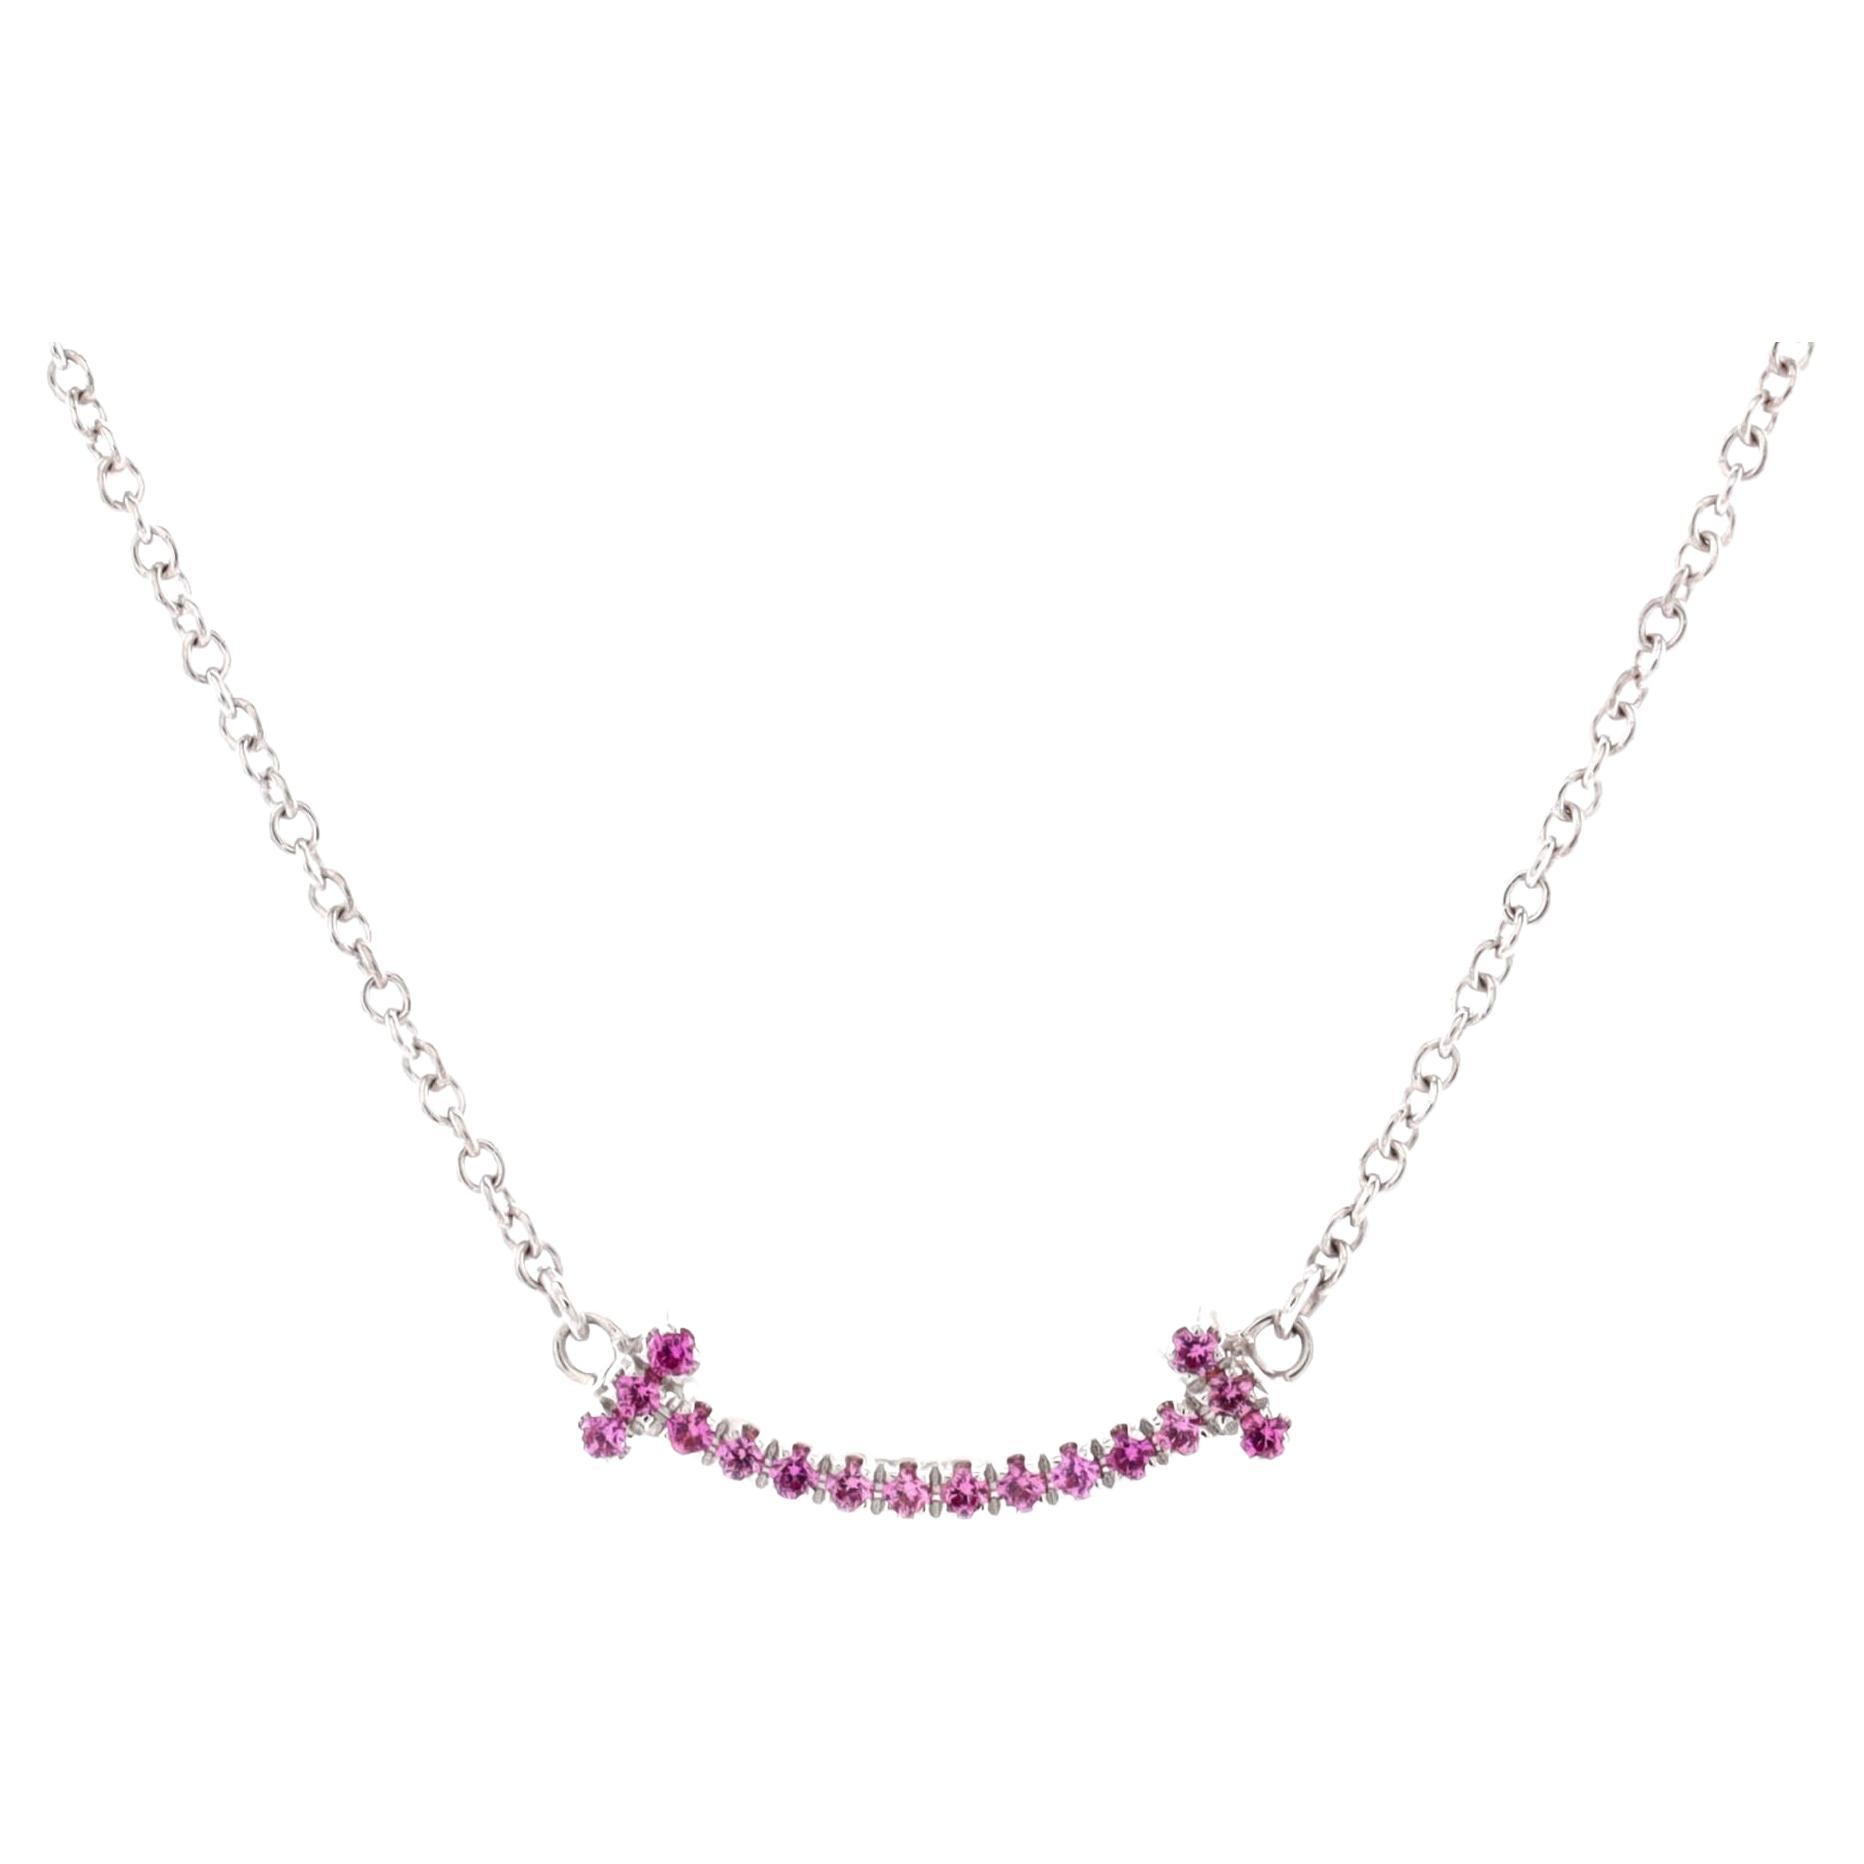 Tiffany & Co. T Smile Pendant Necklace 18k White Gold with Pink Sapphires Mini